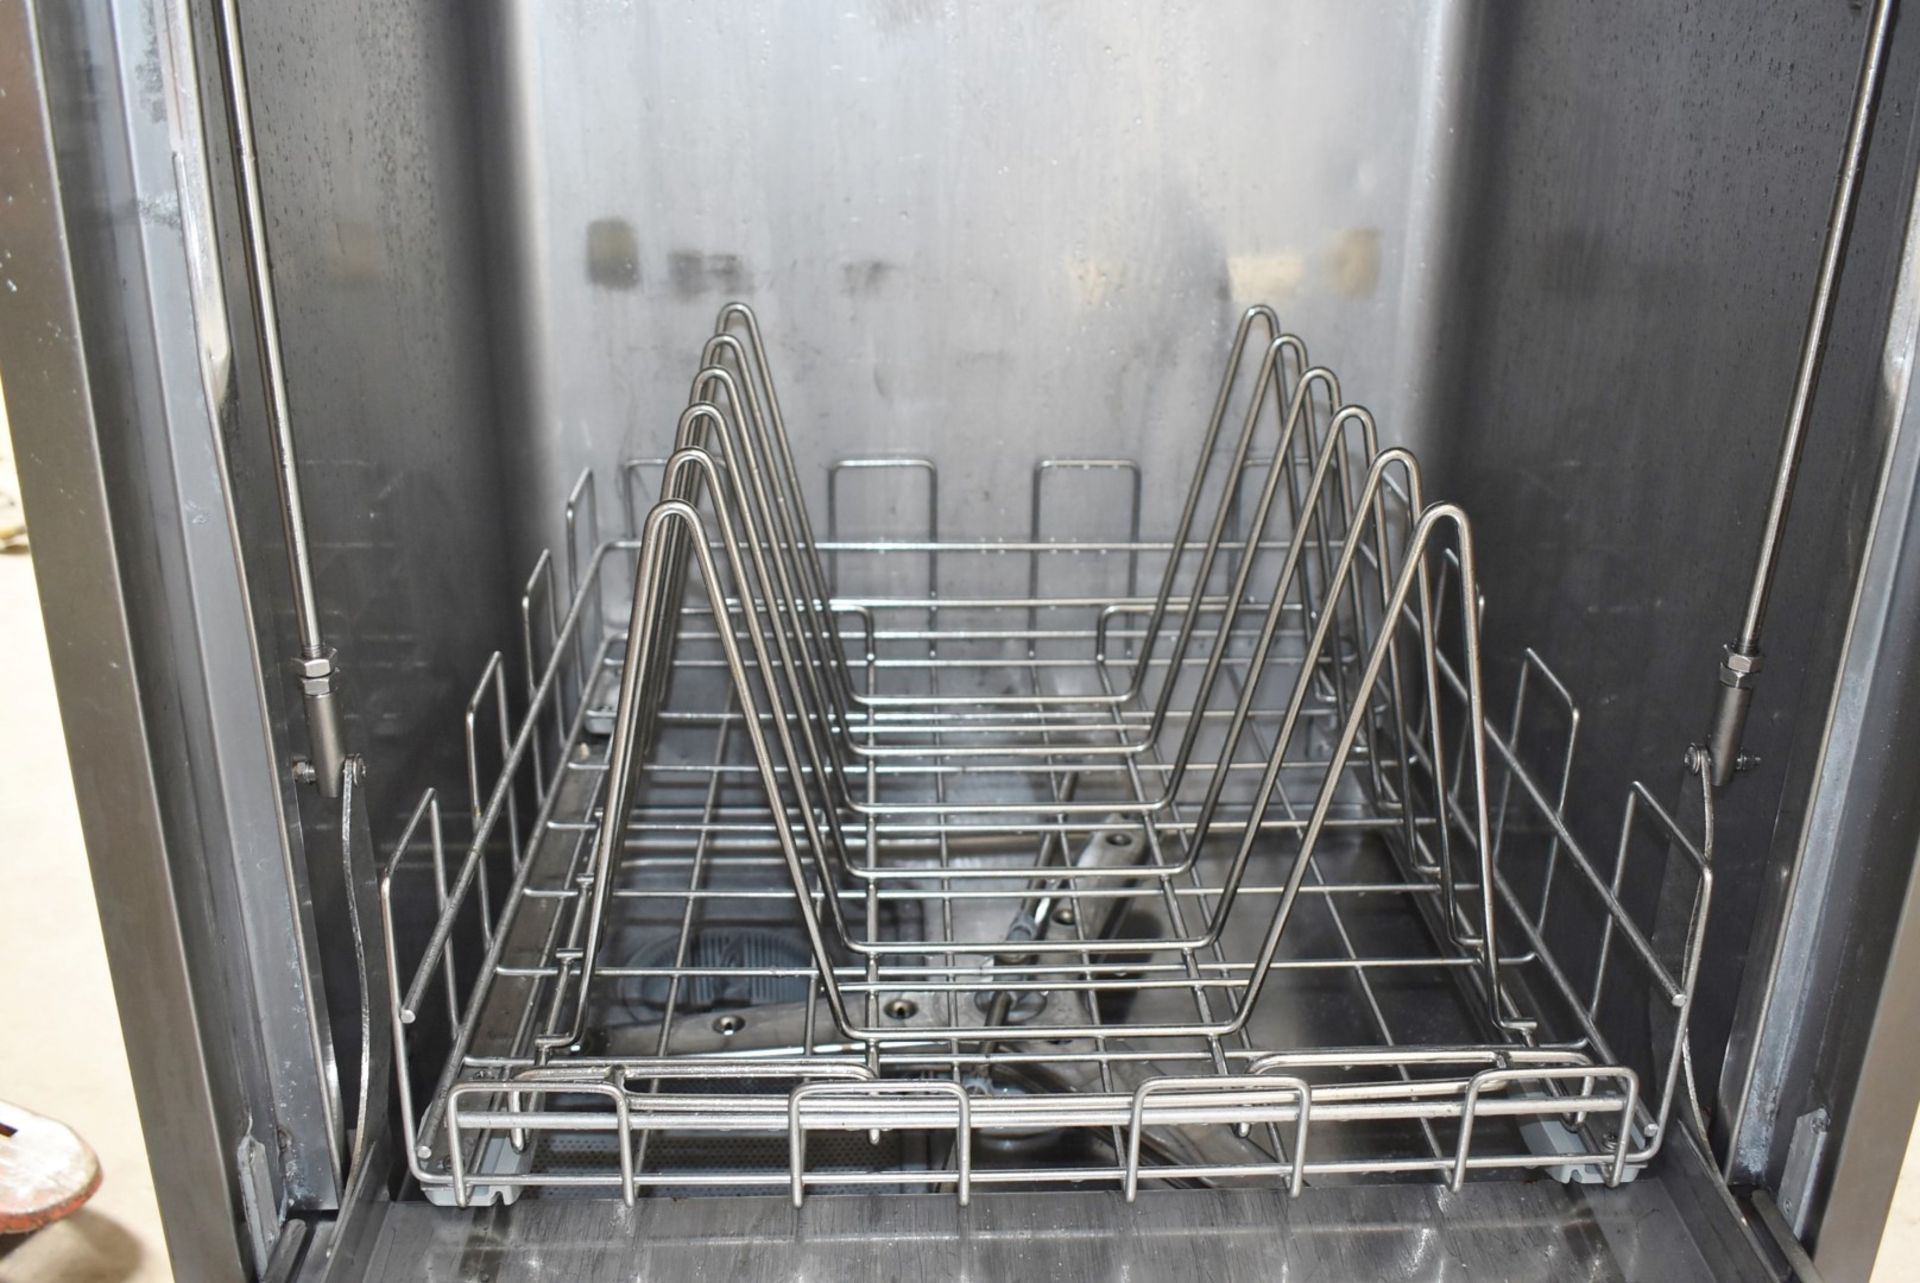 1 x Hobart Upright Heavy Duty Dishwasher For Oven Trays / Cooking Pans - 3 Phase - RRP £17,000! - Image 8 of 14